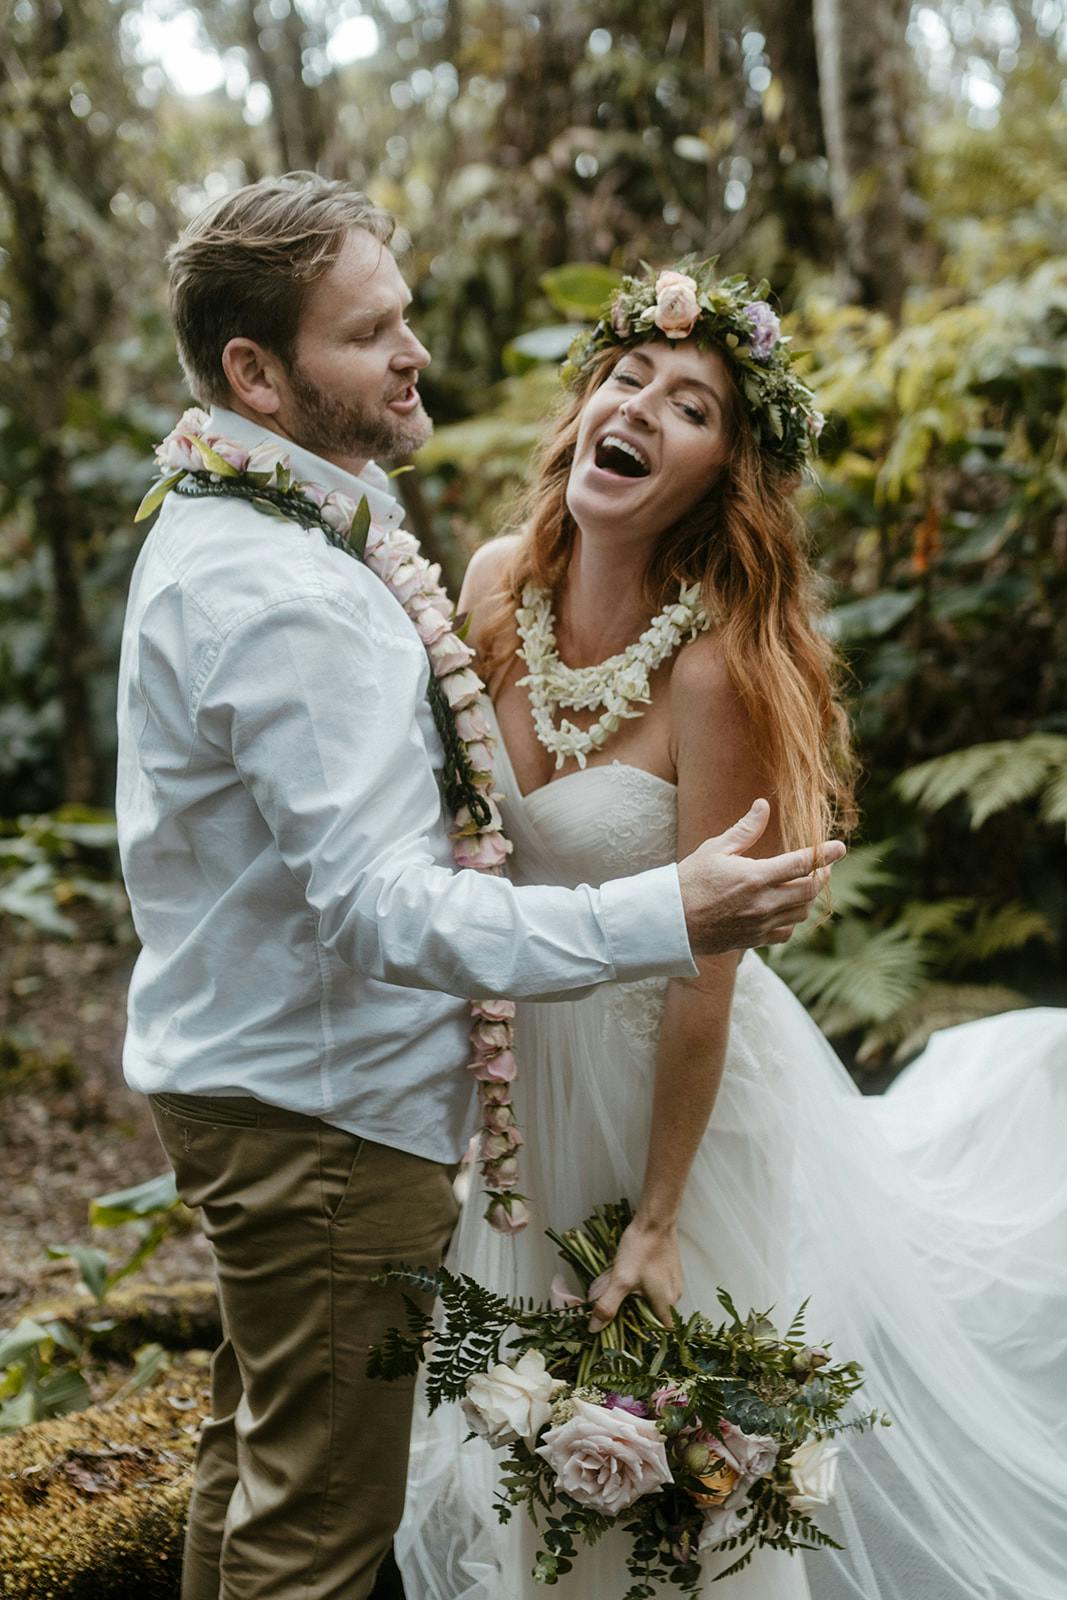 Best Hawaii beach wedding photographer for capturing your special day